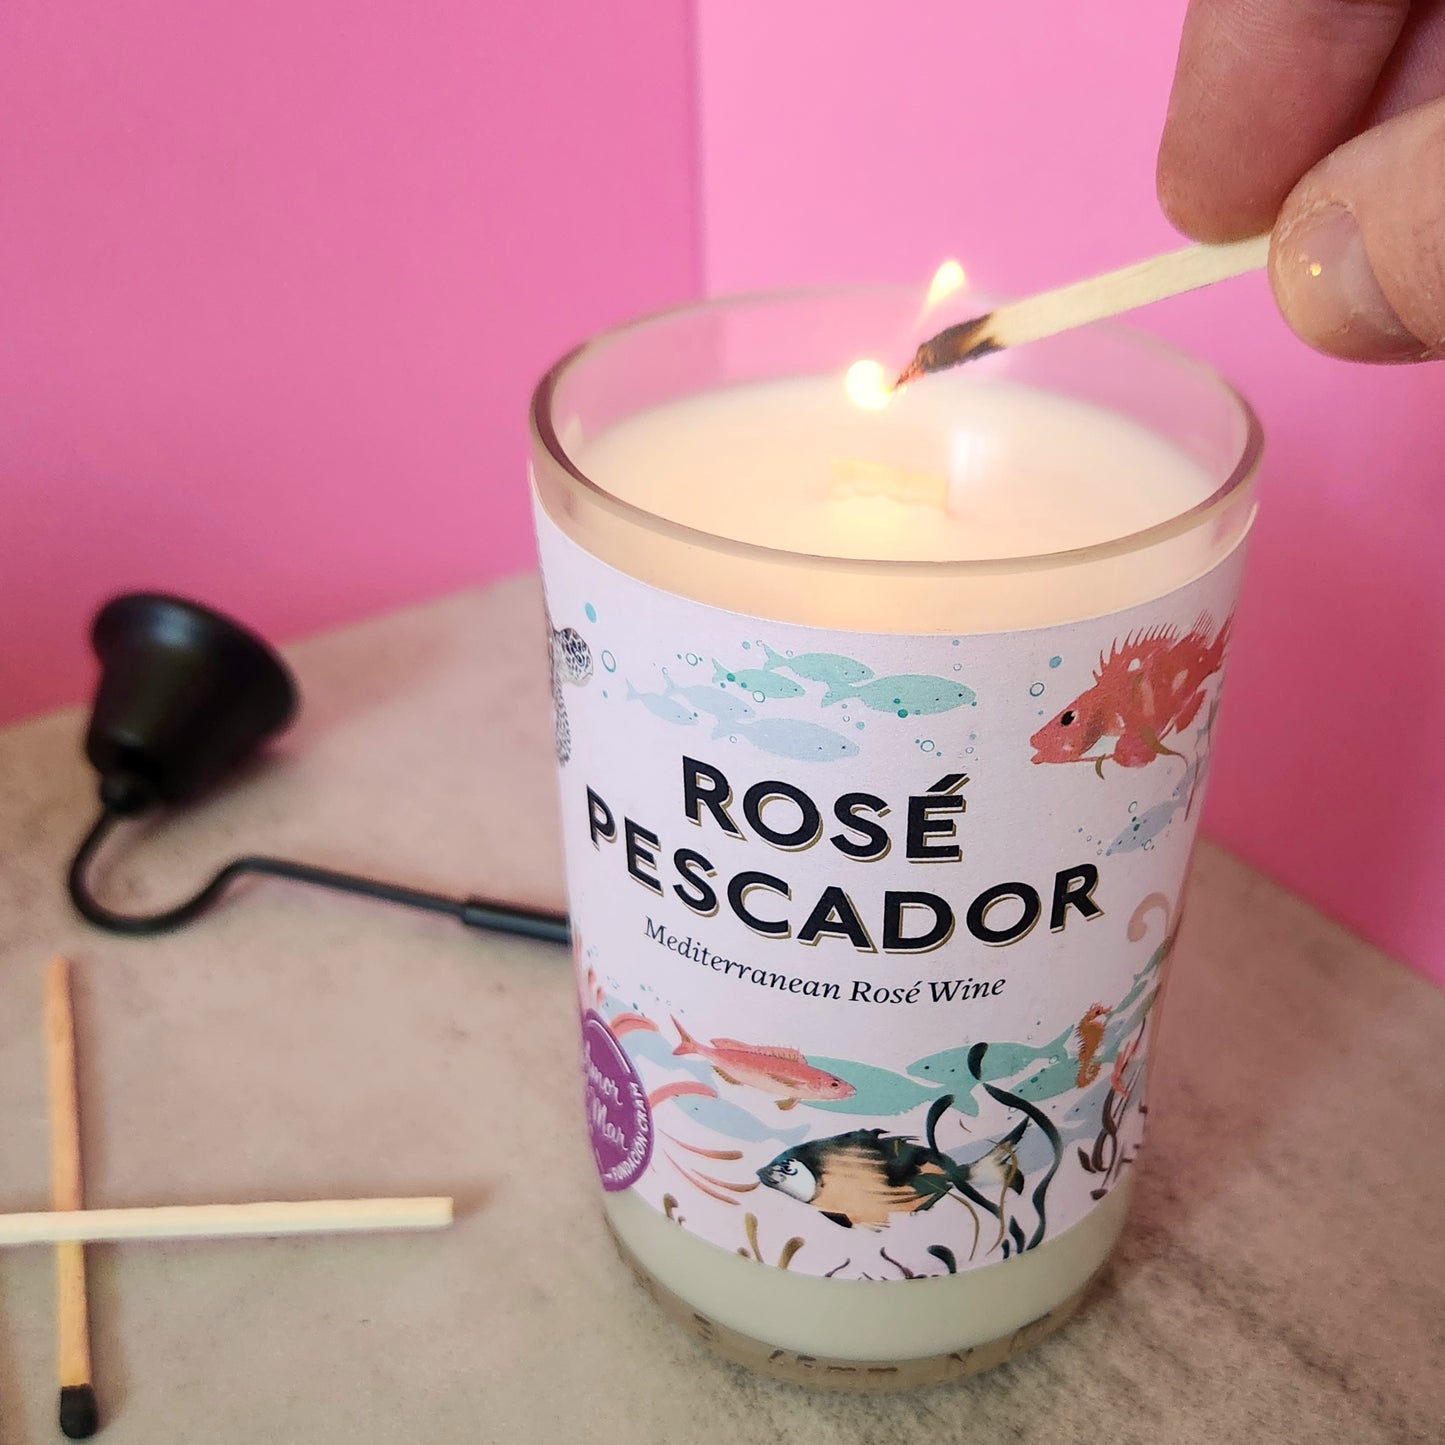 White candle made in a cut wine bottle.  Label stays Rose' Pescador Mediterranean Rose' Wine and has a pink background with drawings of sealife.  Candle is being lit.